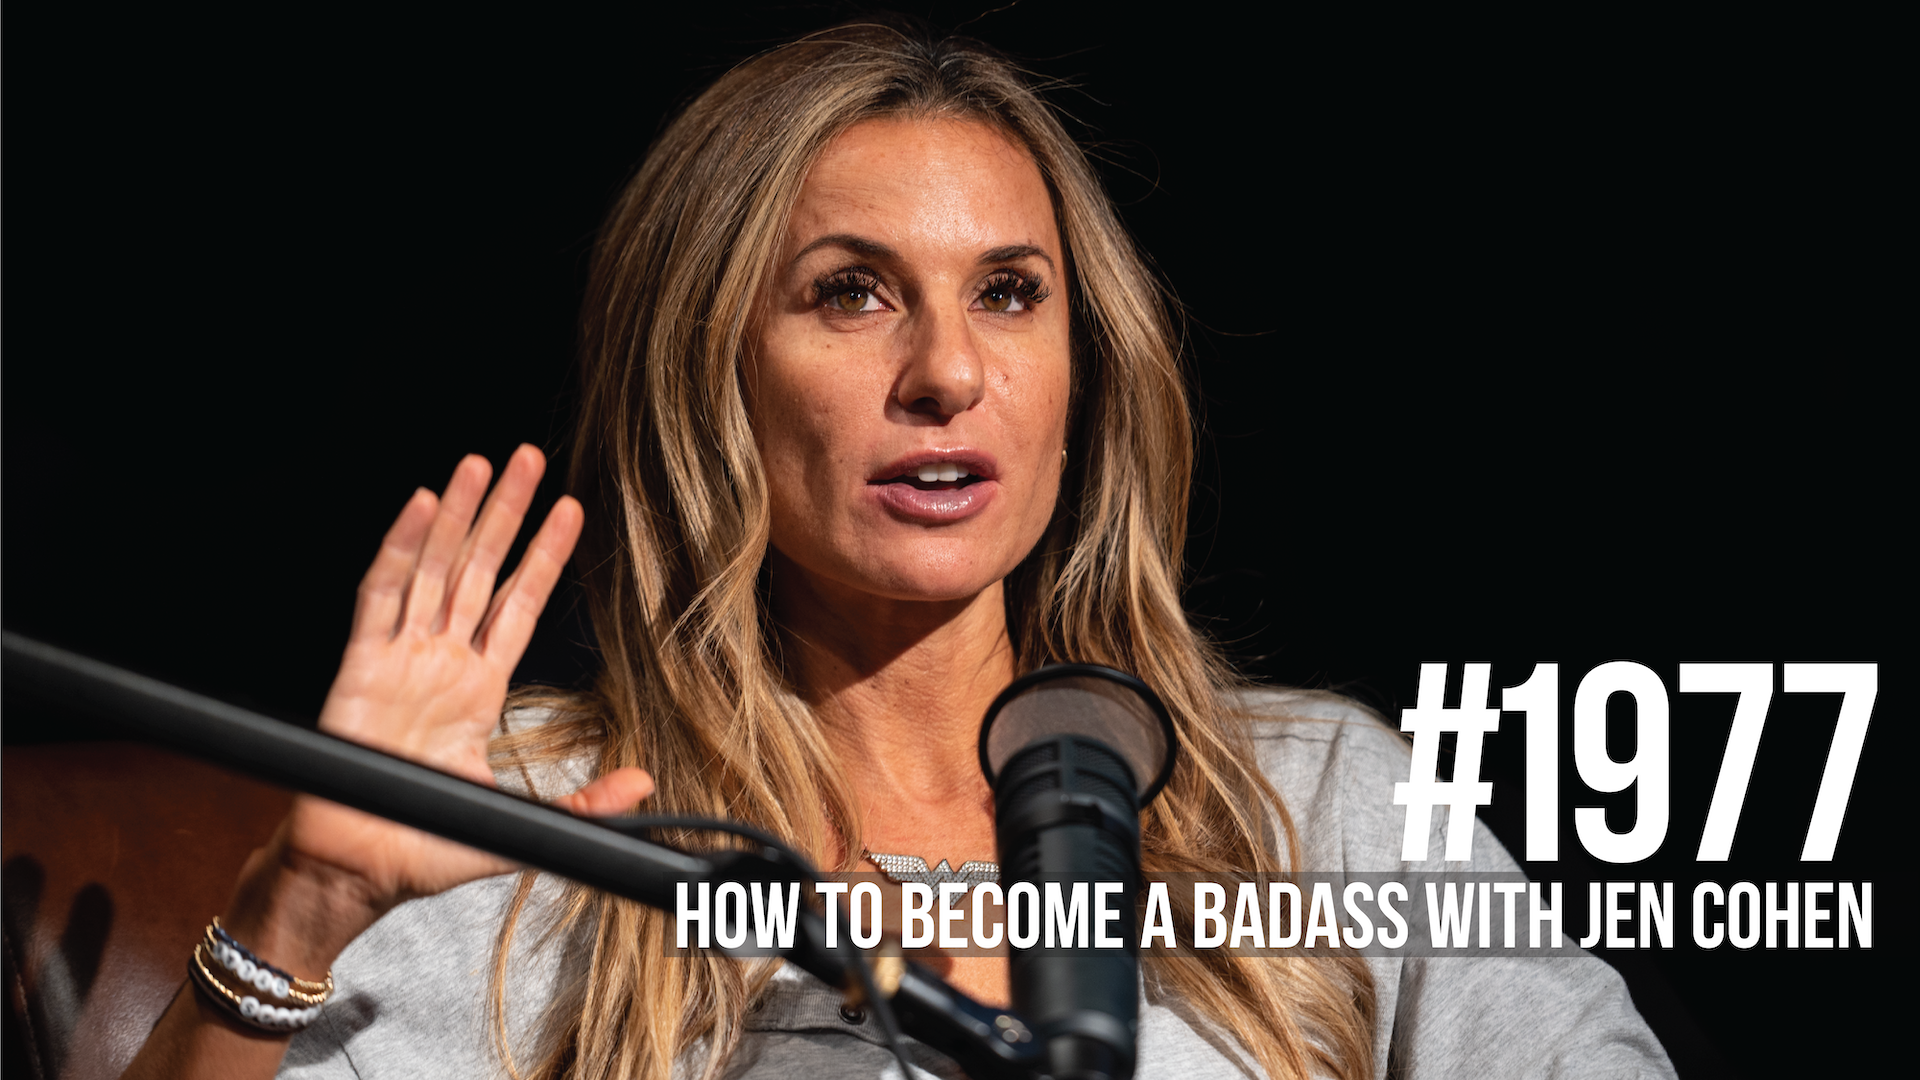 1977: How to Become a Badass With Jen Cohen